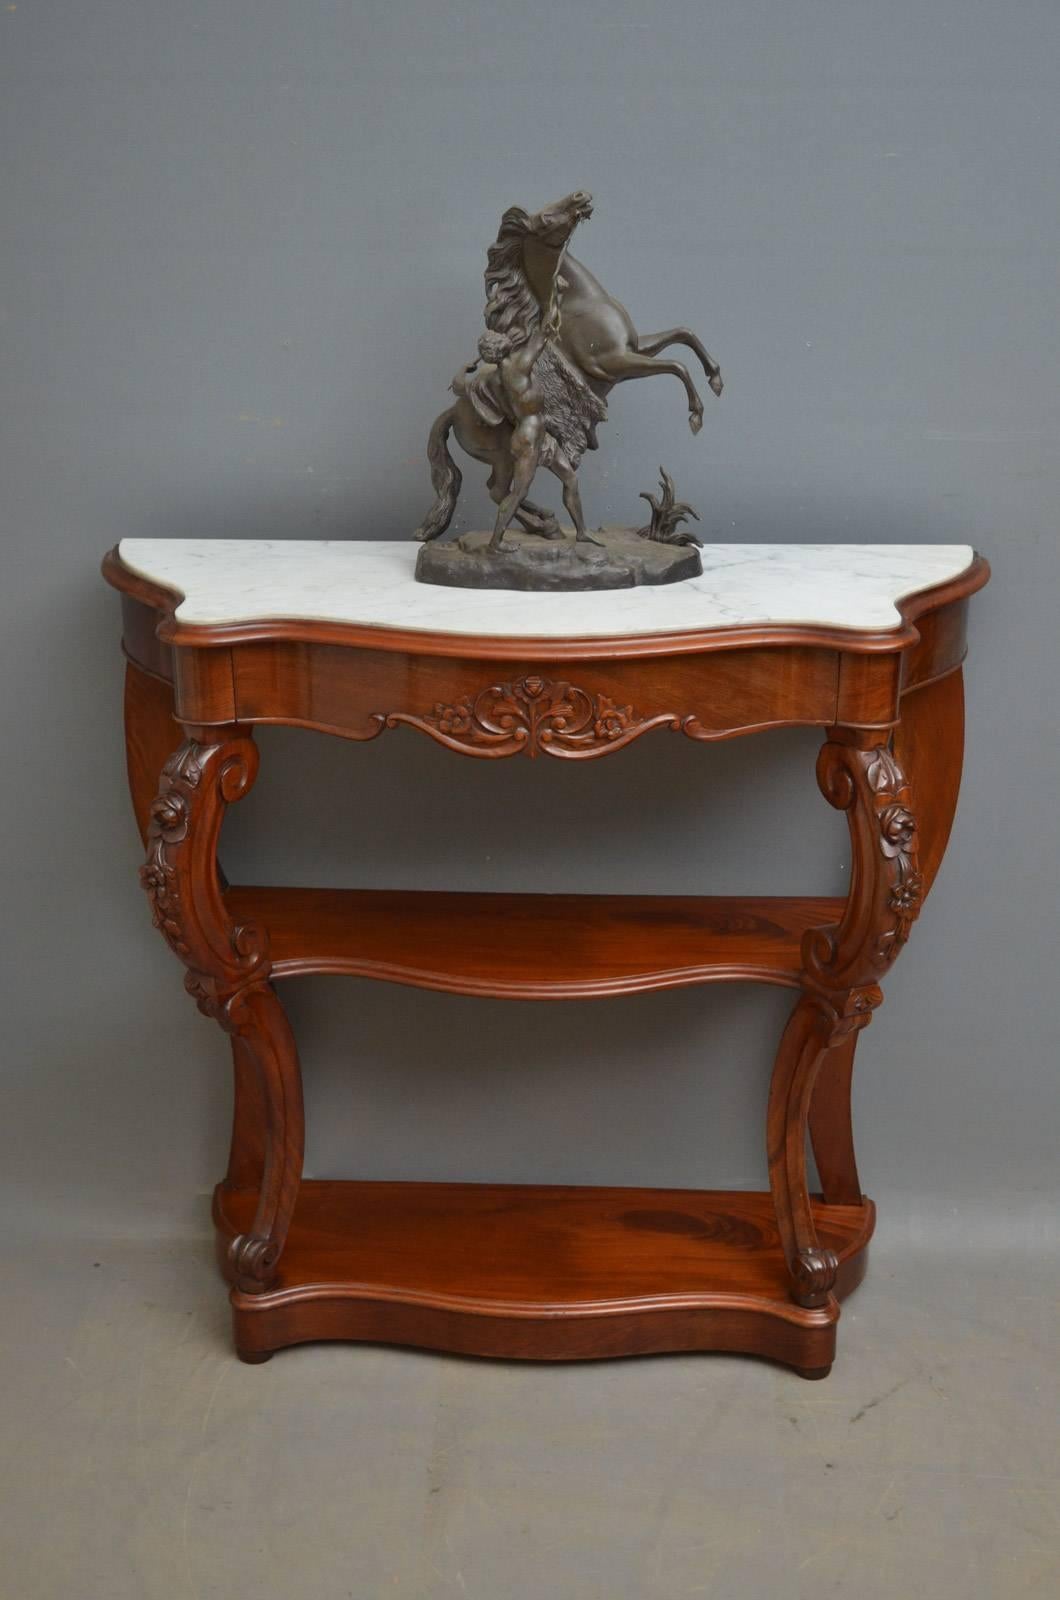 K0296 19th century Continental, mahogany hall table of serpentine design, having white veined marble above a carved mahogany lined drawer, standing on carved cabriole legs united by two undertiers and terminating in bun feet. This antique hall table